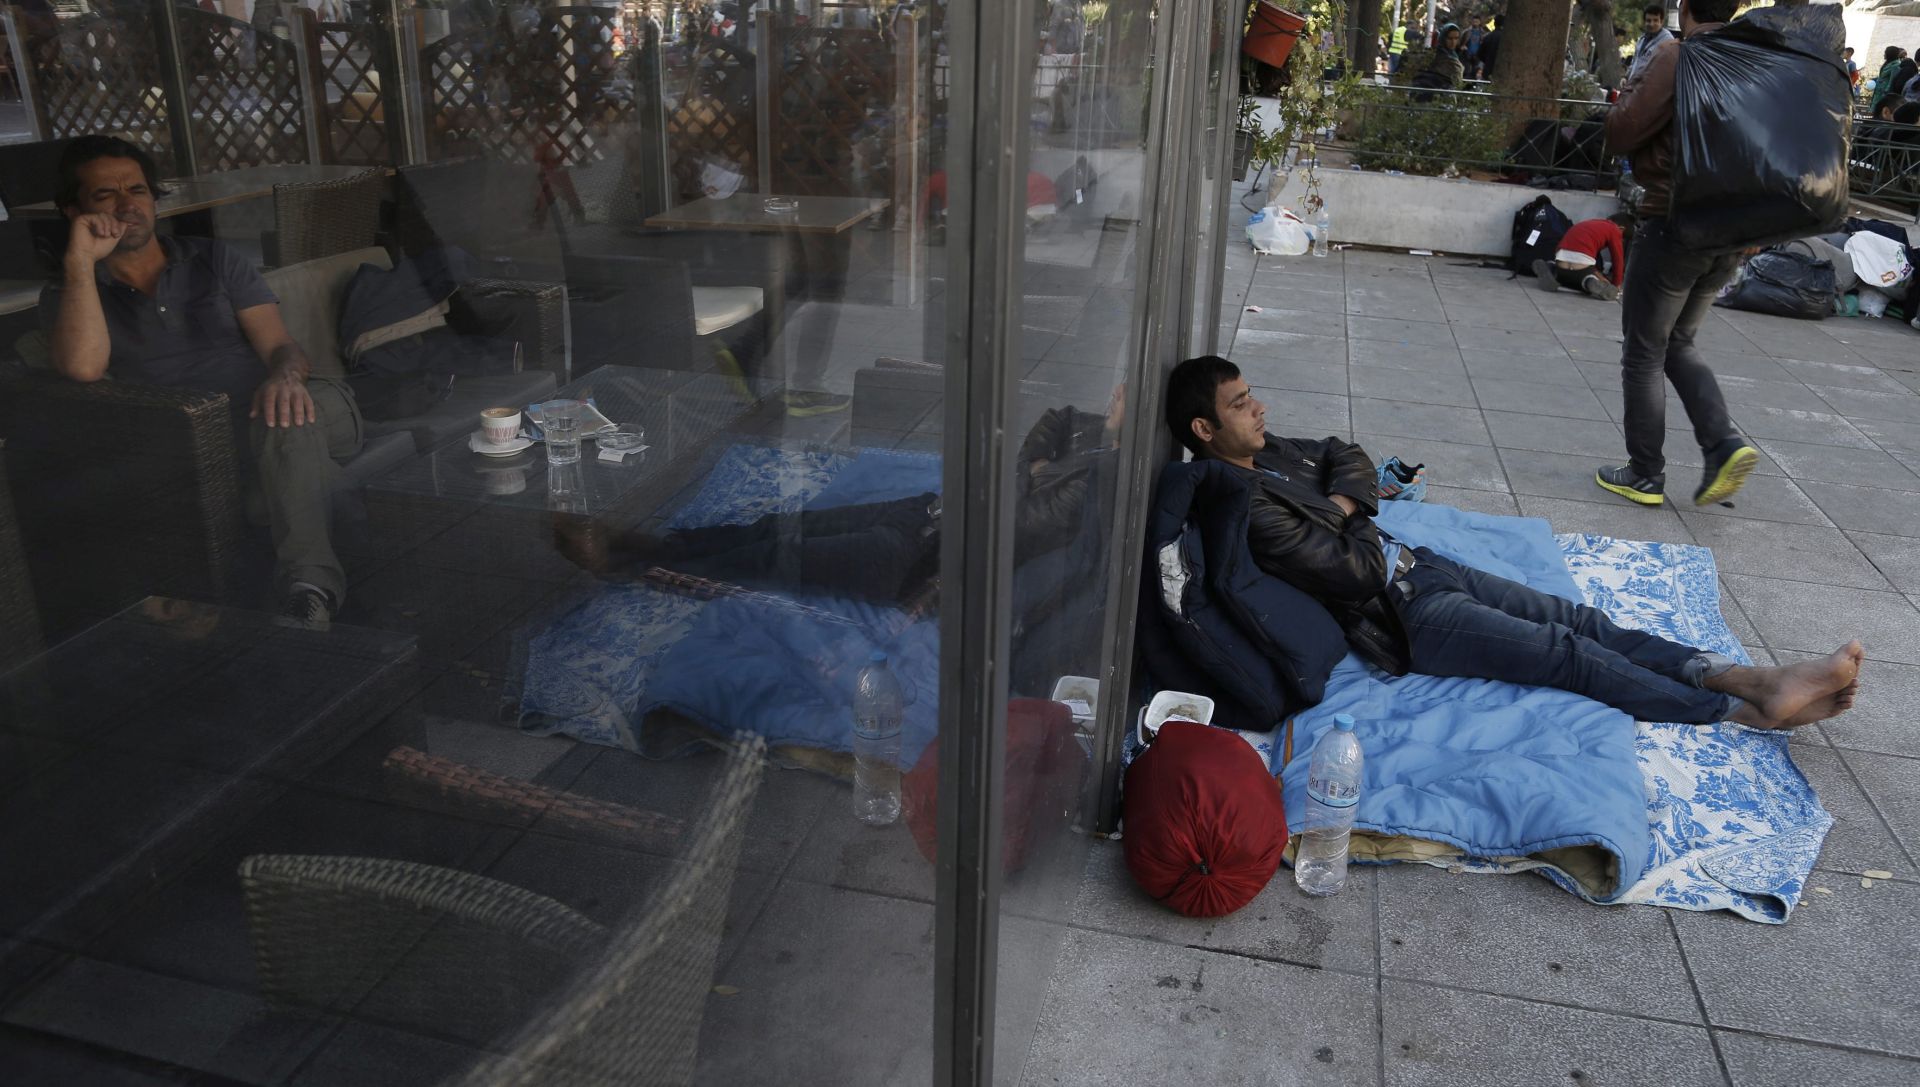 epa05019212 A customer sits in cafe as an Afghan man rests outside of it at Victoria Square, where hundreds of migrants find temporary shelter before continuing their journey to central Europe, in Athens, Greece, 10 November 2015. Europe is dealing with its greatest influx of migrants and asylum seekers since World War II as immigrants fleeing war and poverty in the Middle East, Afghanistan and Africa try to reach Germany and other Western European countries.  EPA/YANNIS KOLESIDIS